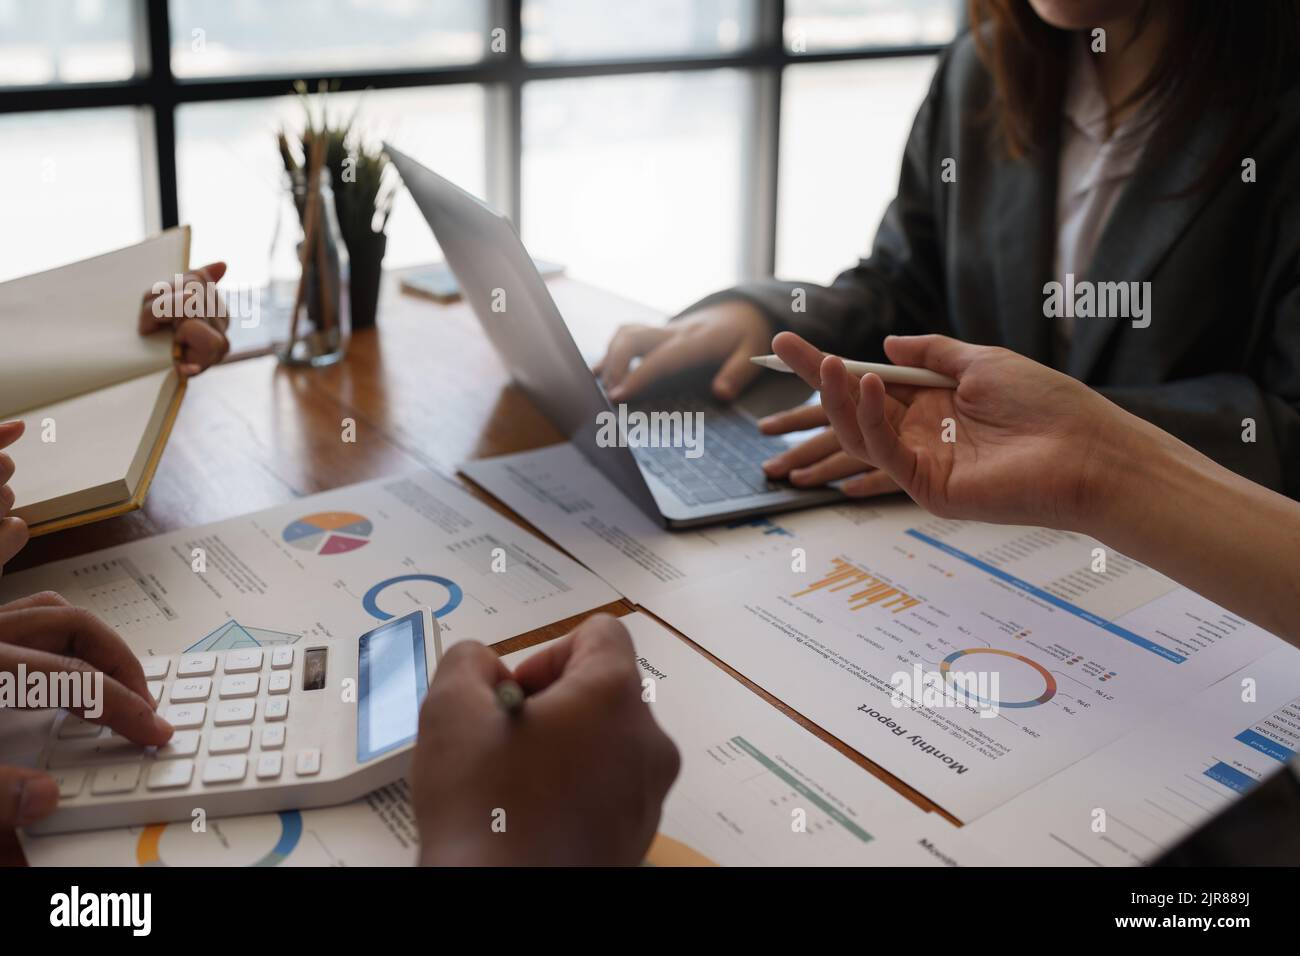 Success business team. Business data dashboard analysis by brainstorming Stock Photo